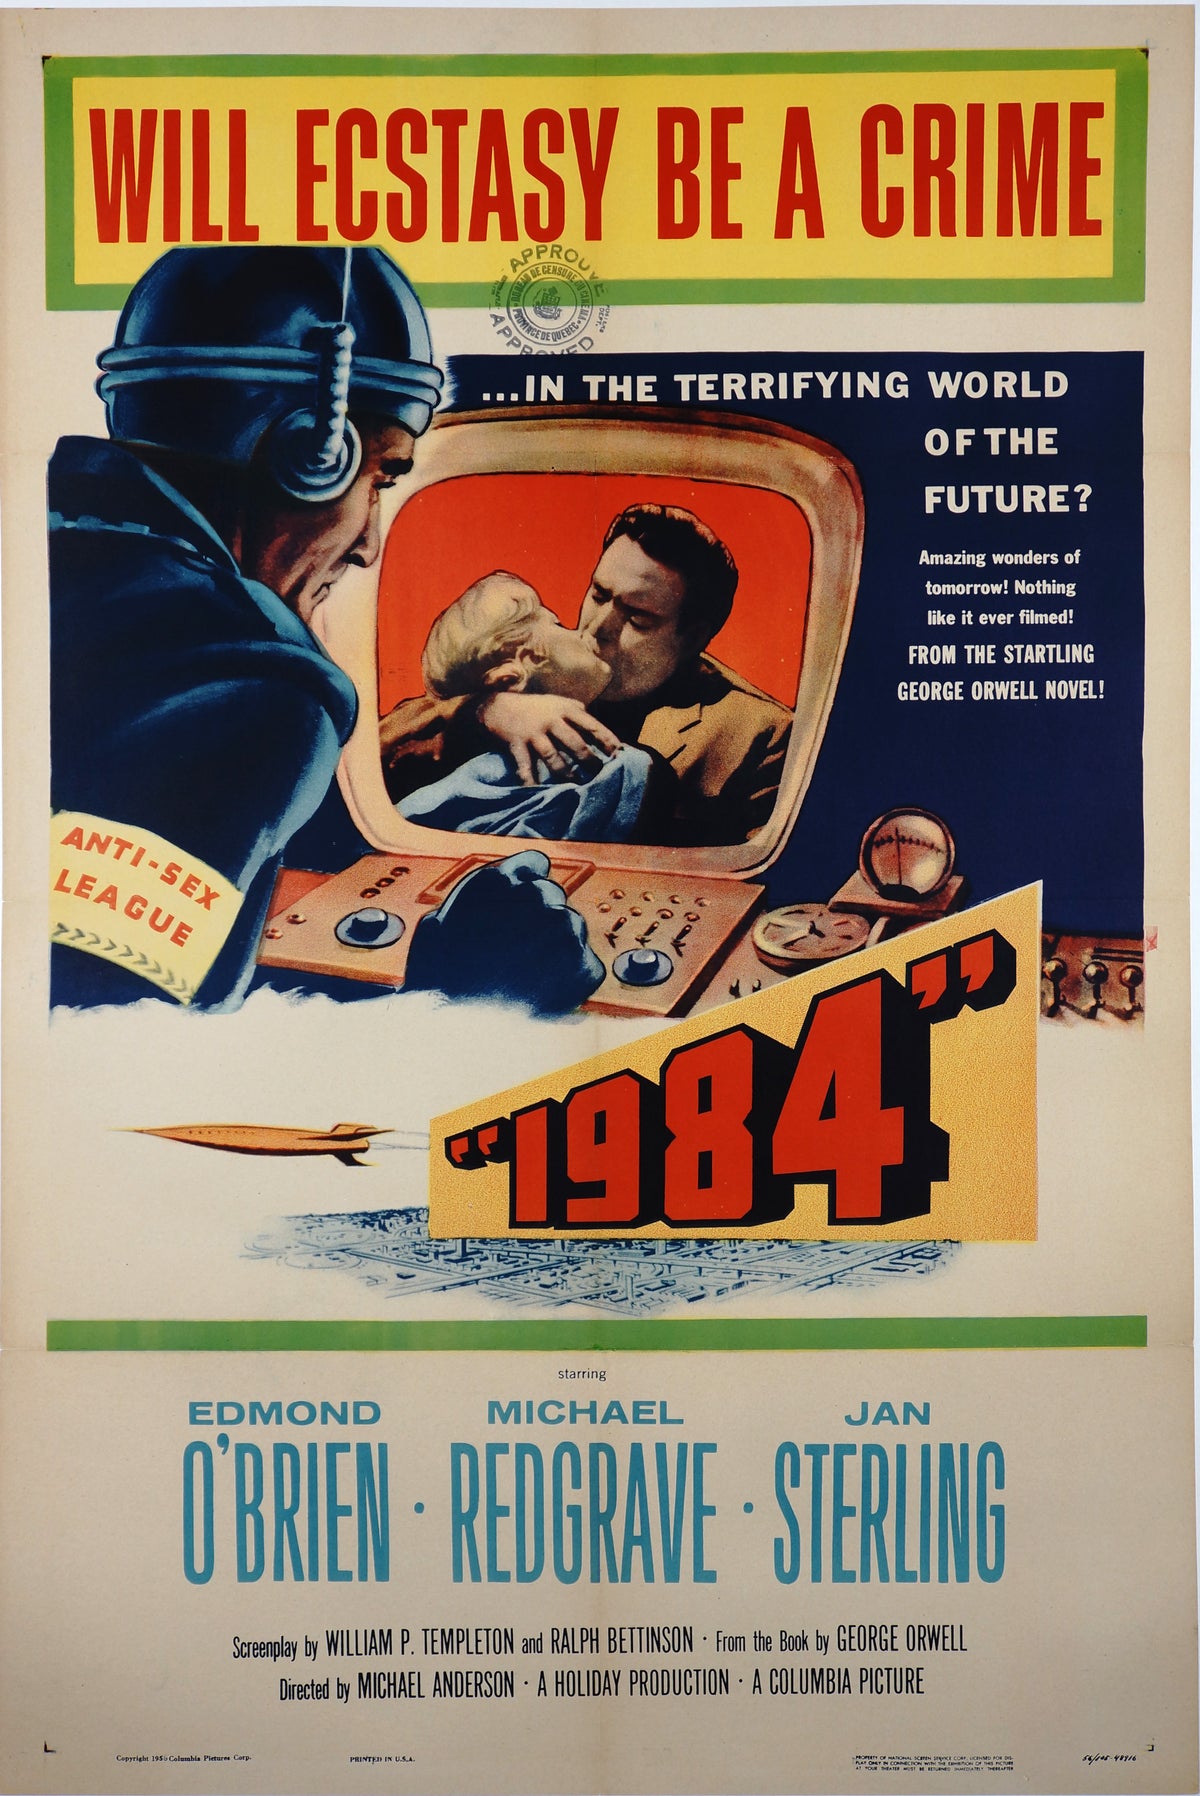 1984 by George Orwell - Authentic Vintage Poster